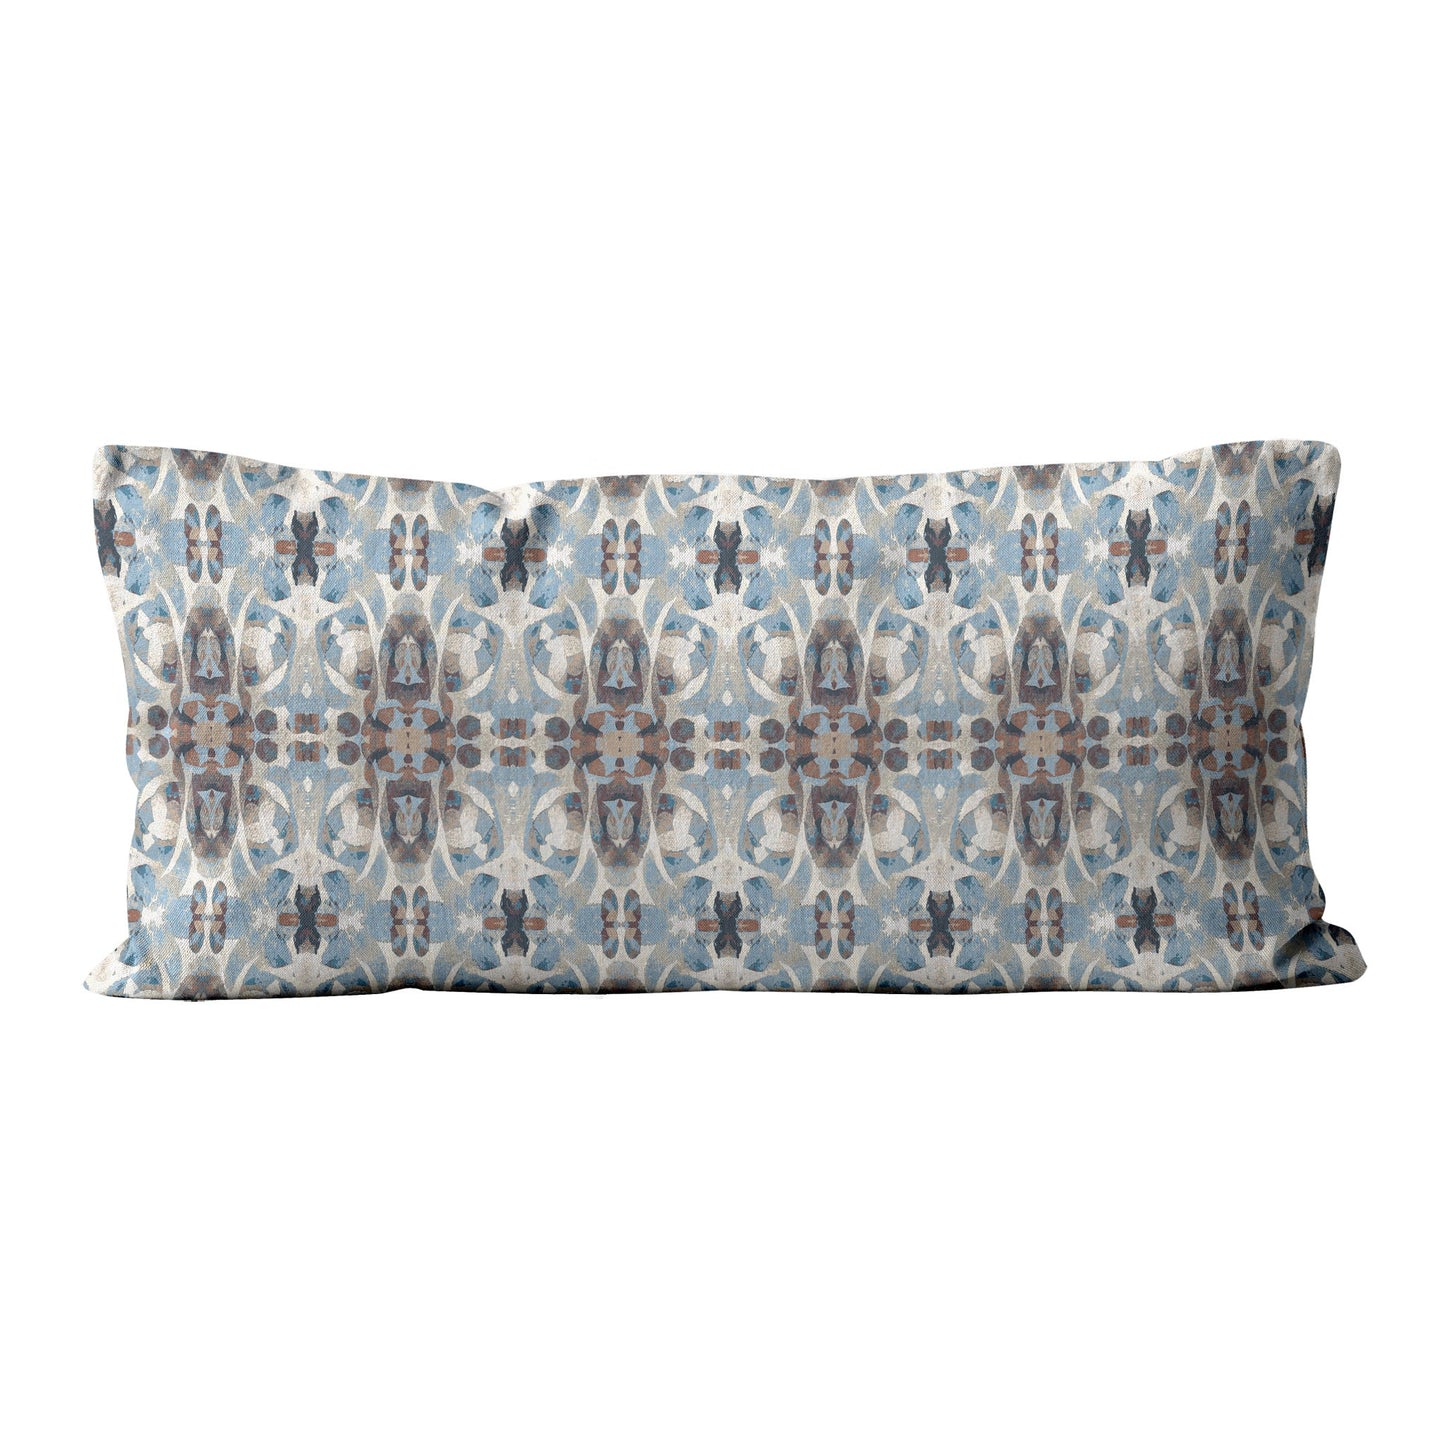 12 x 24 lumbar pillow featuring an abstract hand-painted blue and brown pattern.